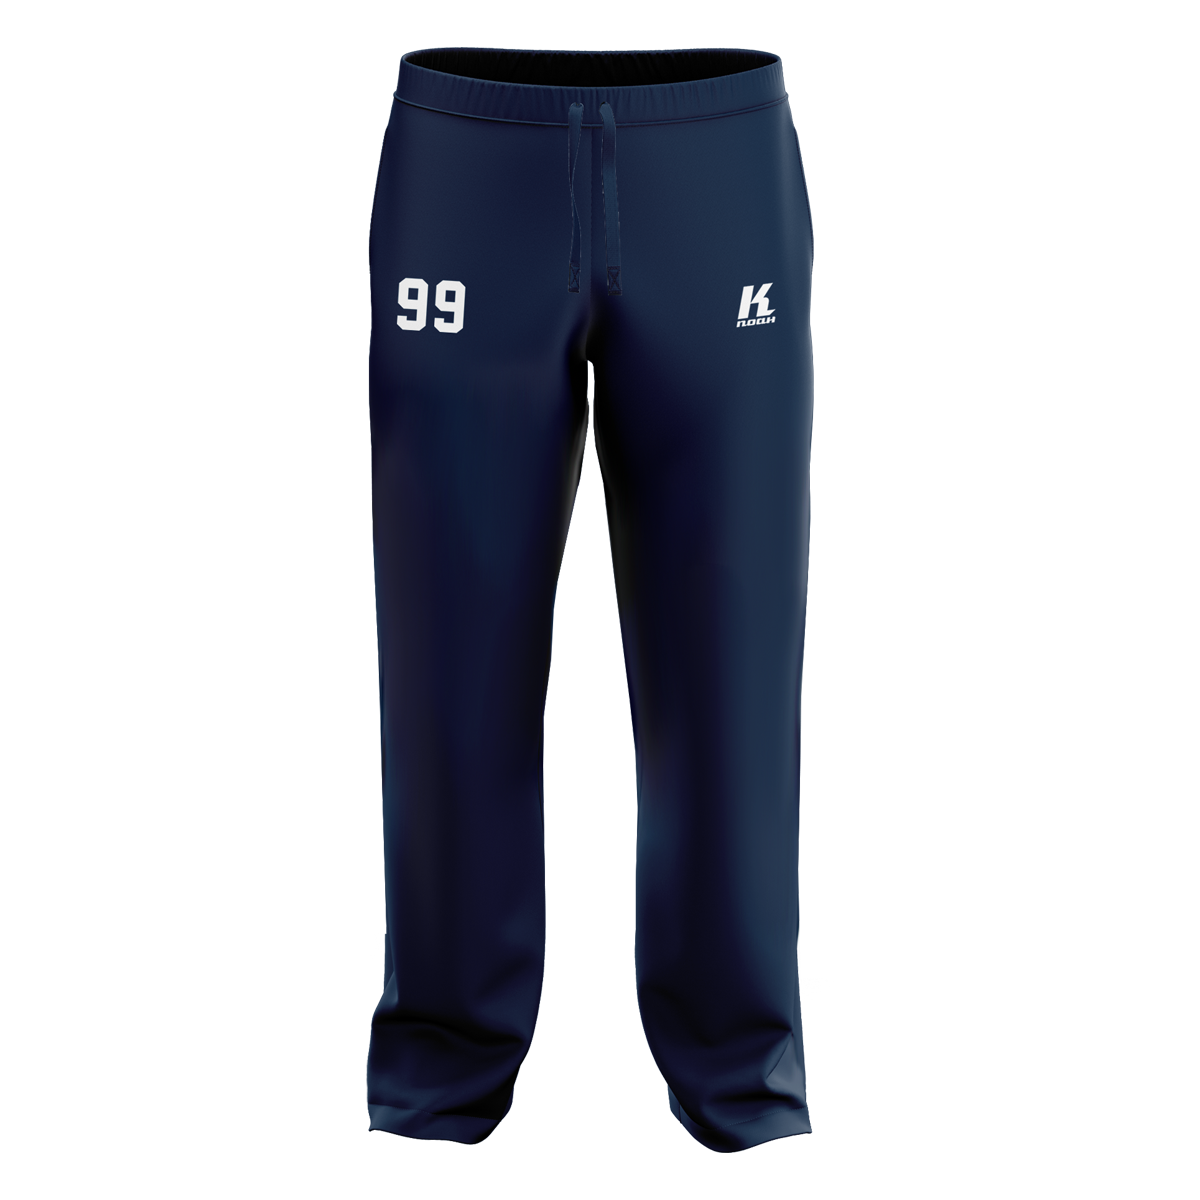 Rams Basic Sweatpant Navy ST799 with Playernumber/Initials